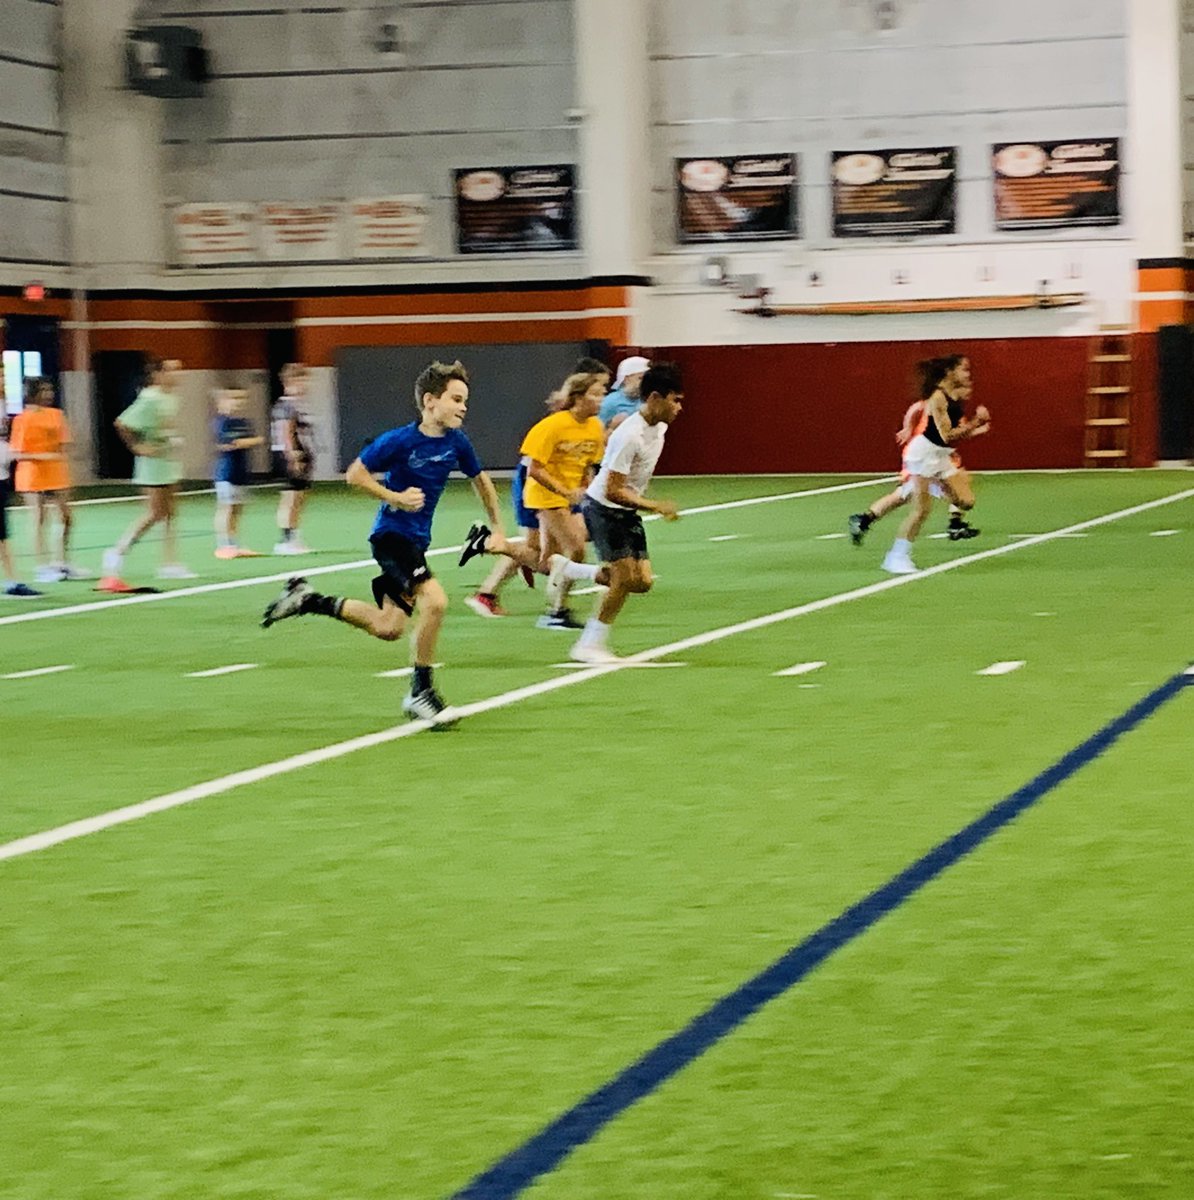 THE FUTURE!!!!!! So proud to be a part of the first ever Future Yellowjackets Strength and Conditioning program. Talk about an action-packed hour of activity. This group has got some ENERGY!! Thanks parents for letting us work with your kids. 👊 #JFND